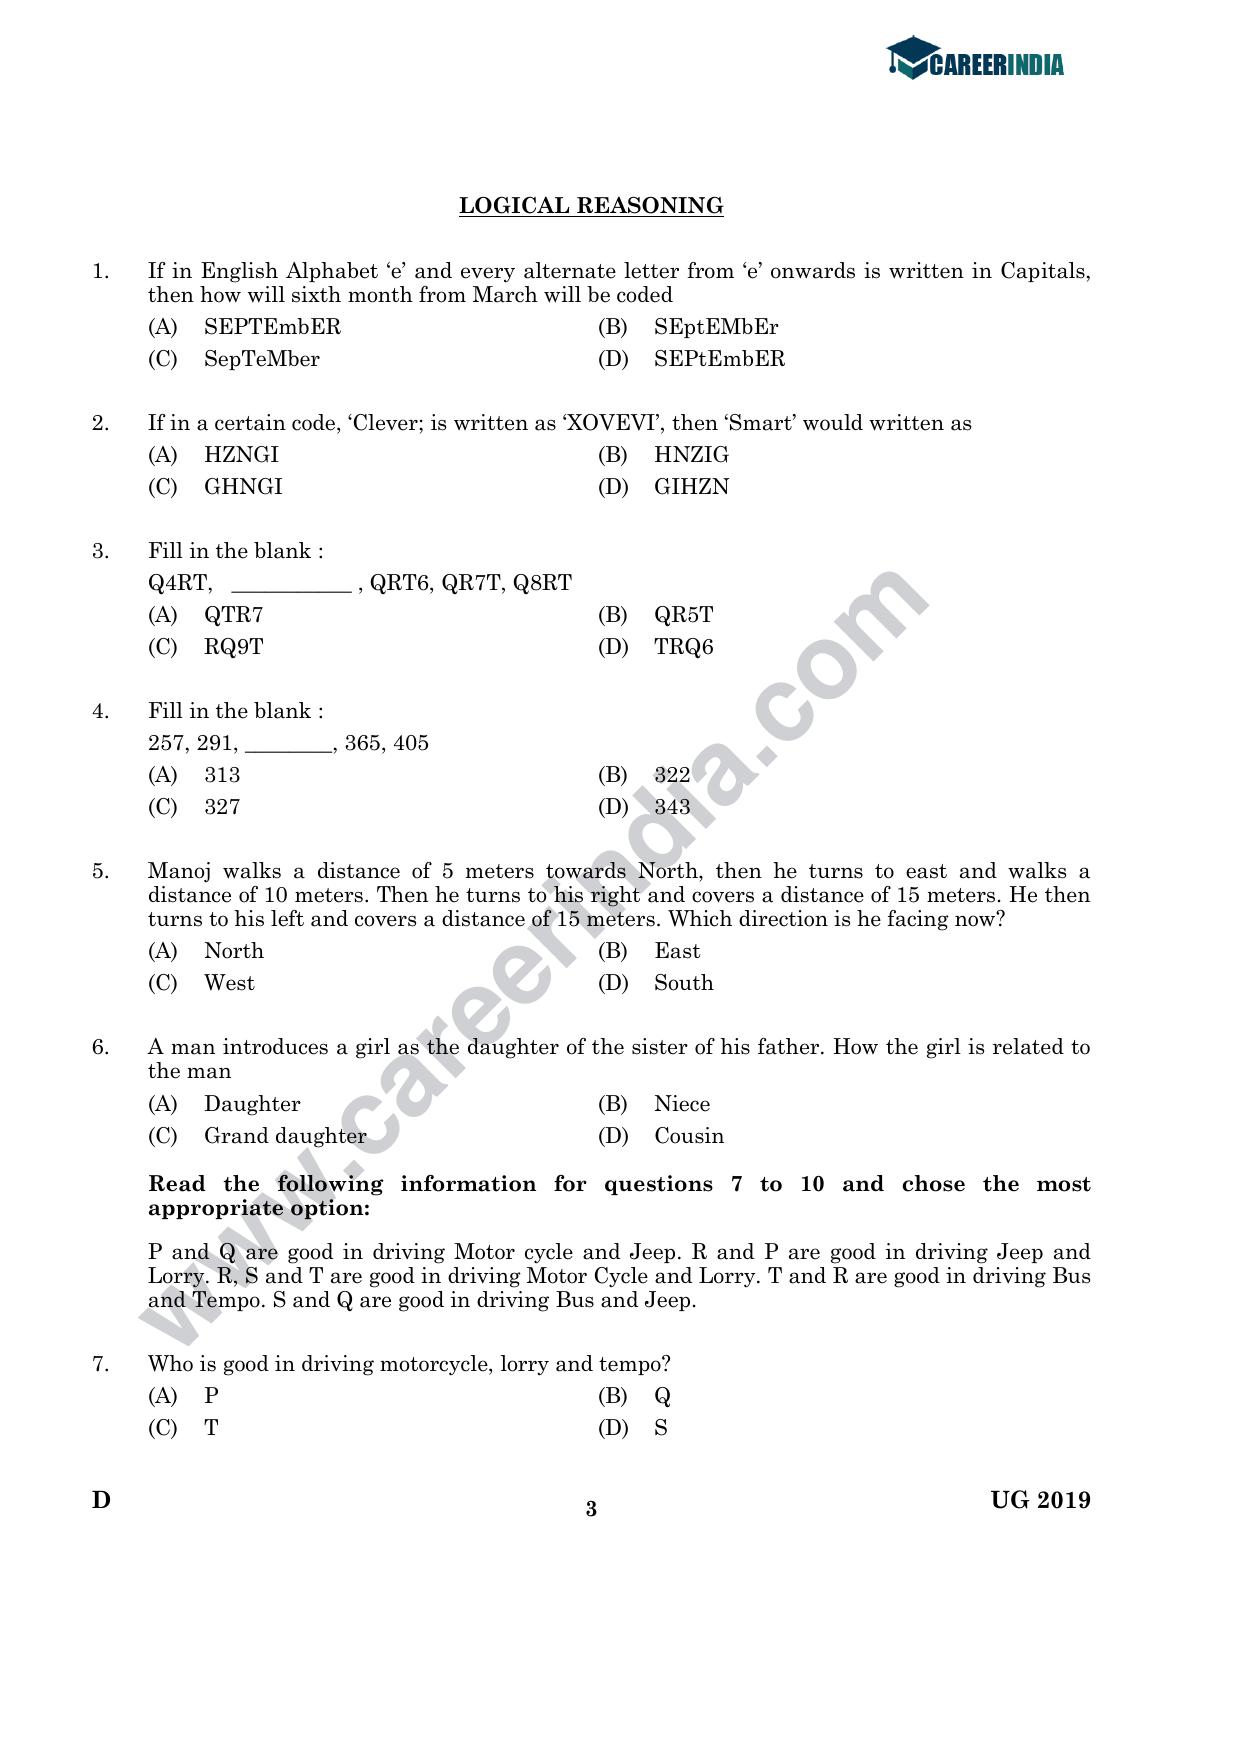 CLAT 2019 UG Logical-Reasoning Question Paper - Page 2